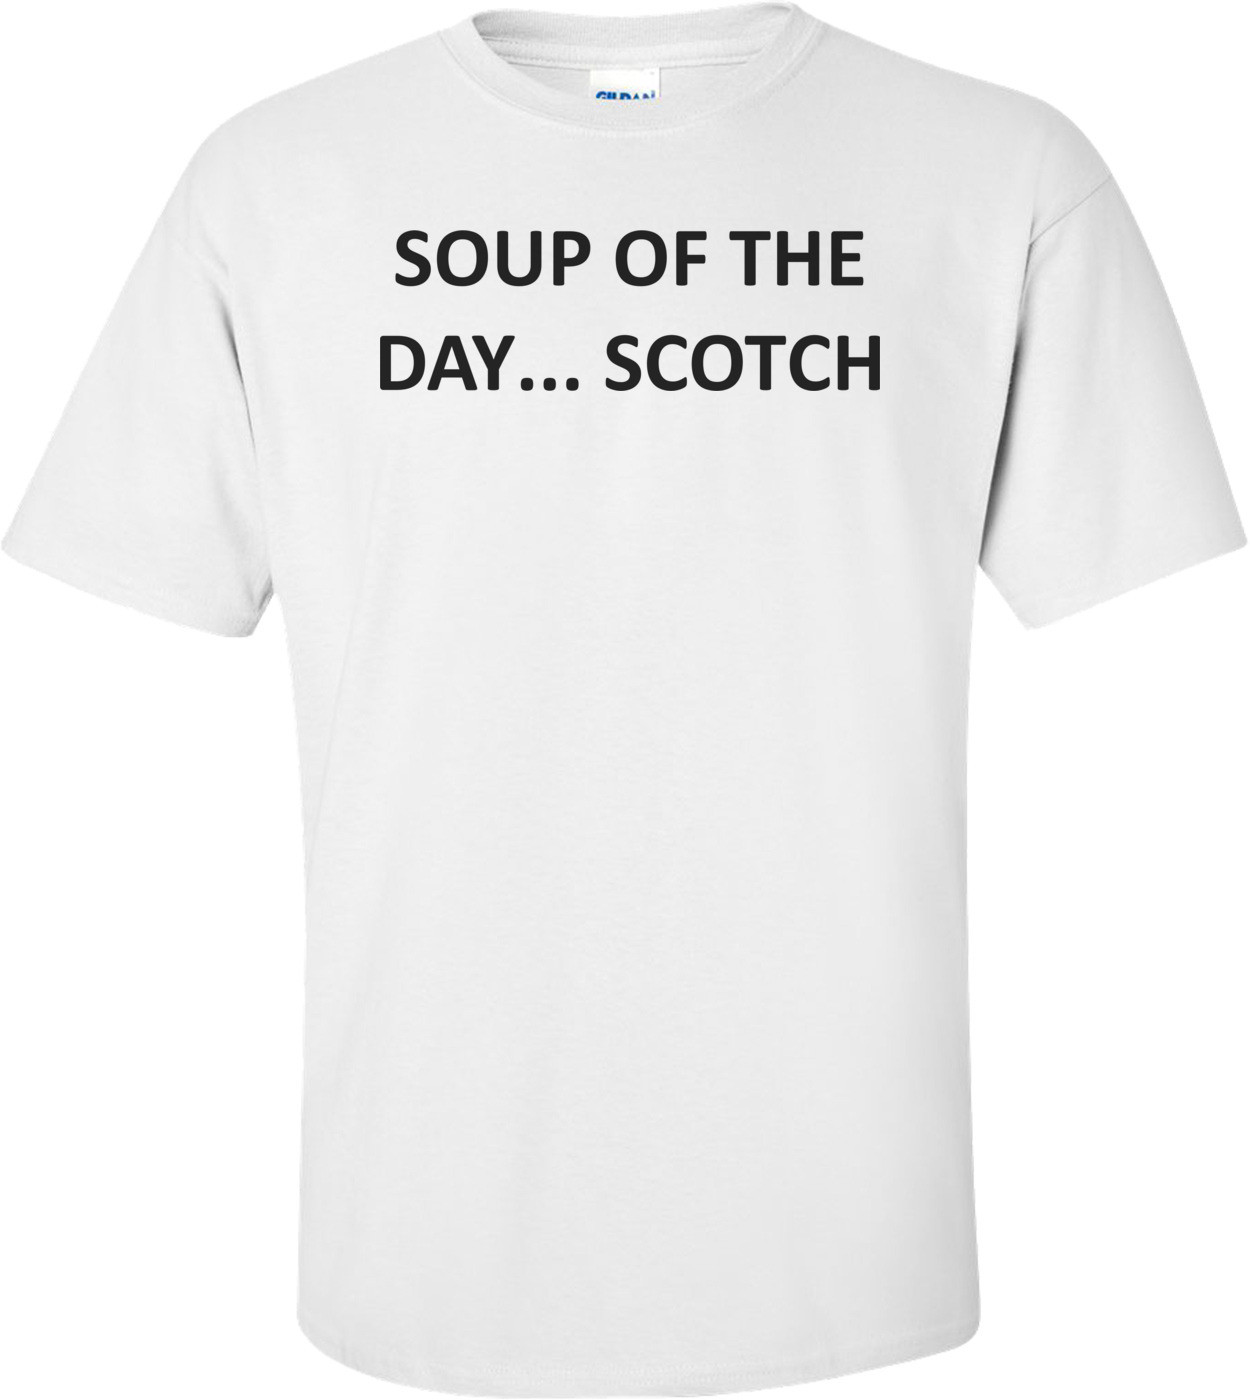 SOUP OF THE DAY... SCOTCH Shirt